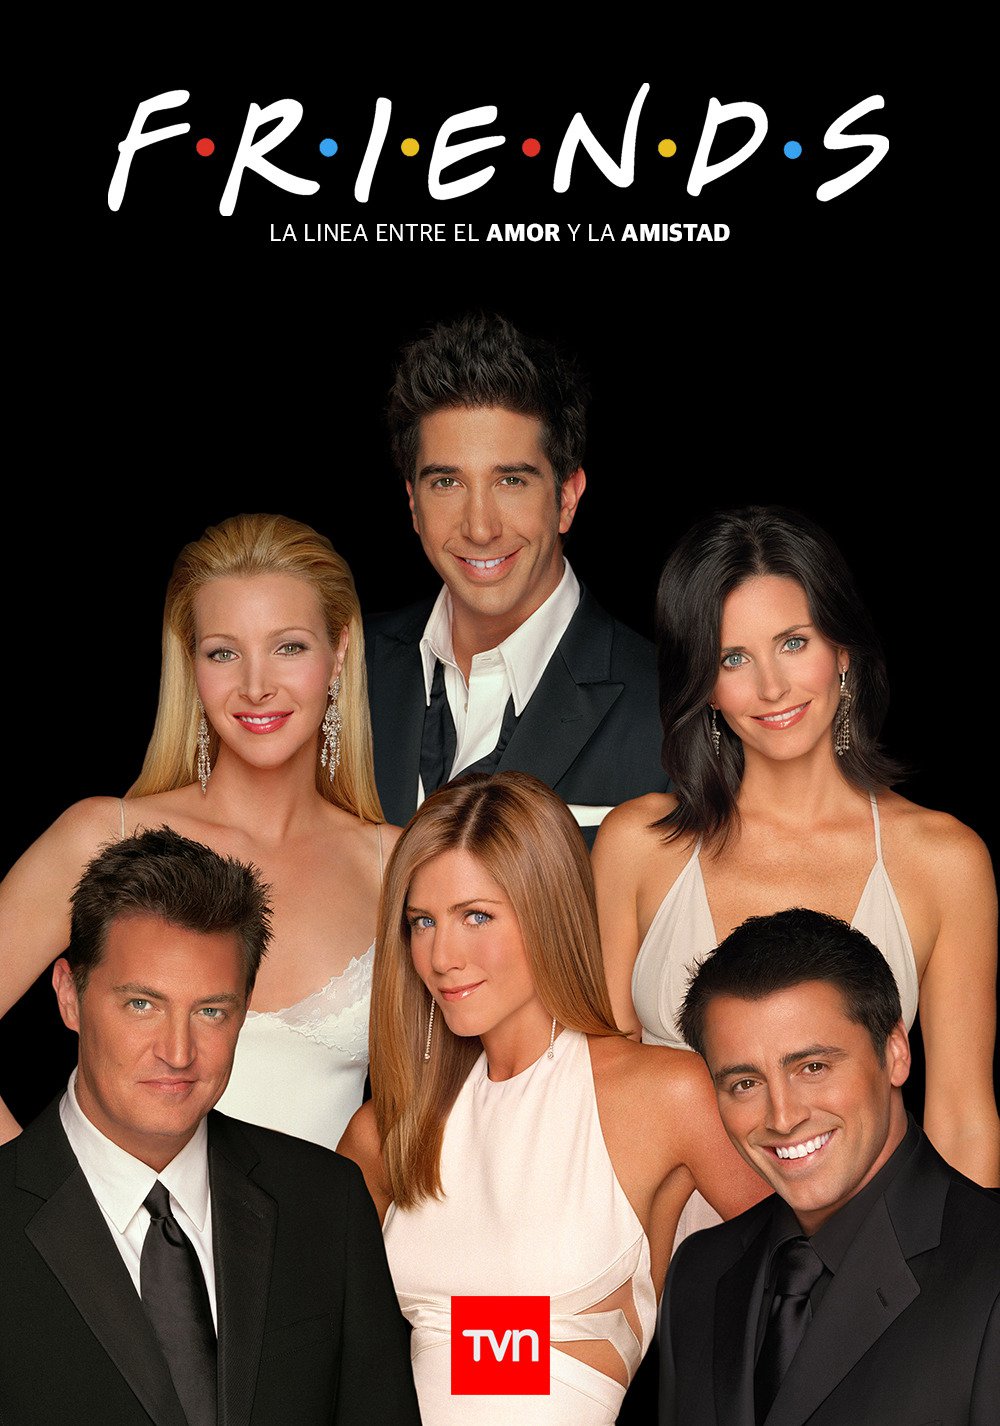 Friends TV Show Poster 13x19 inches